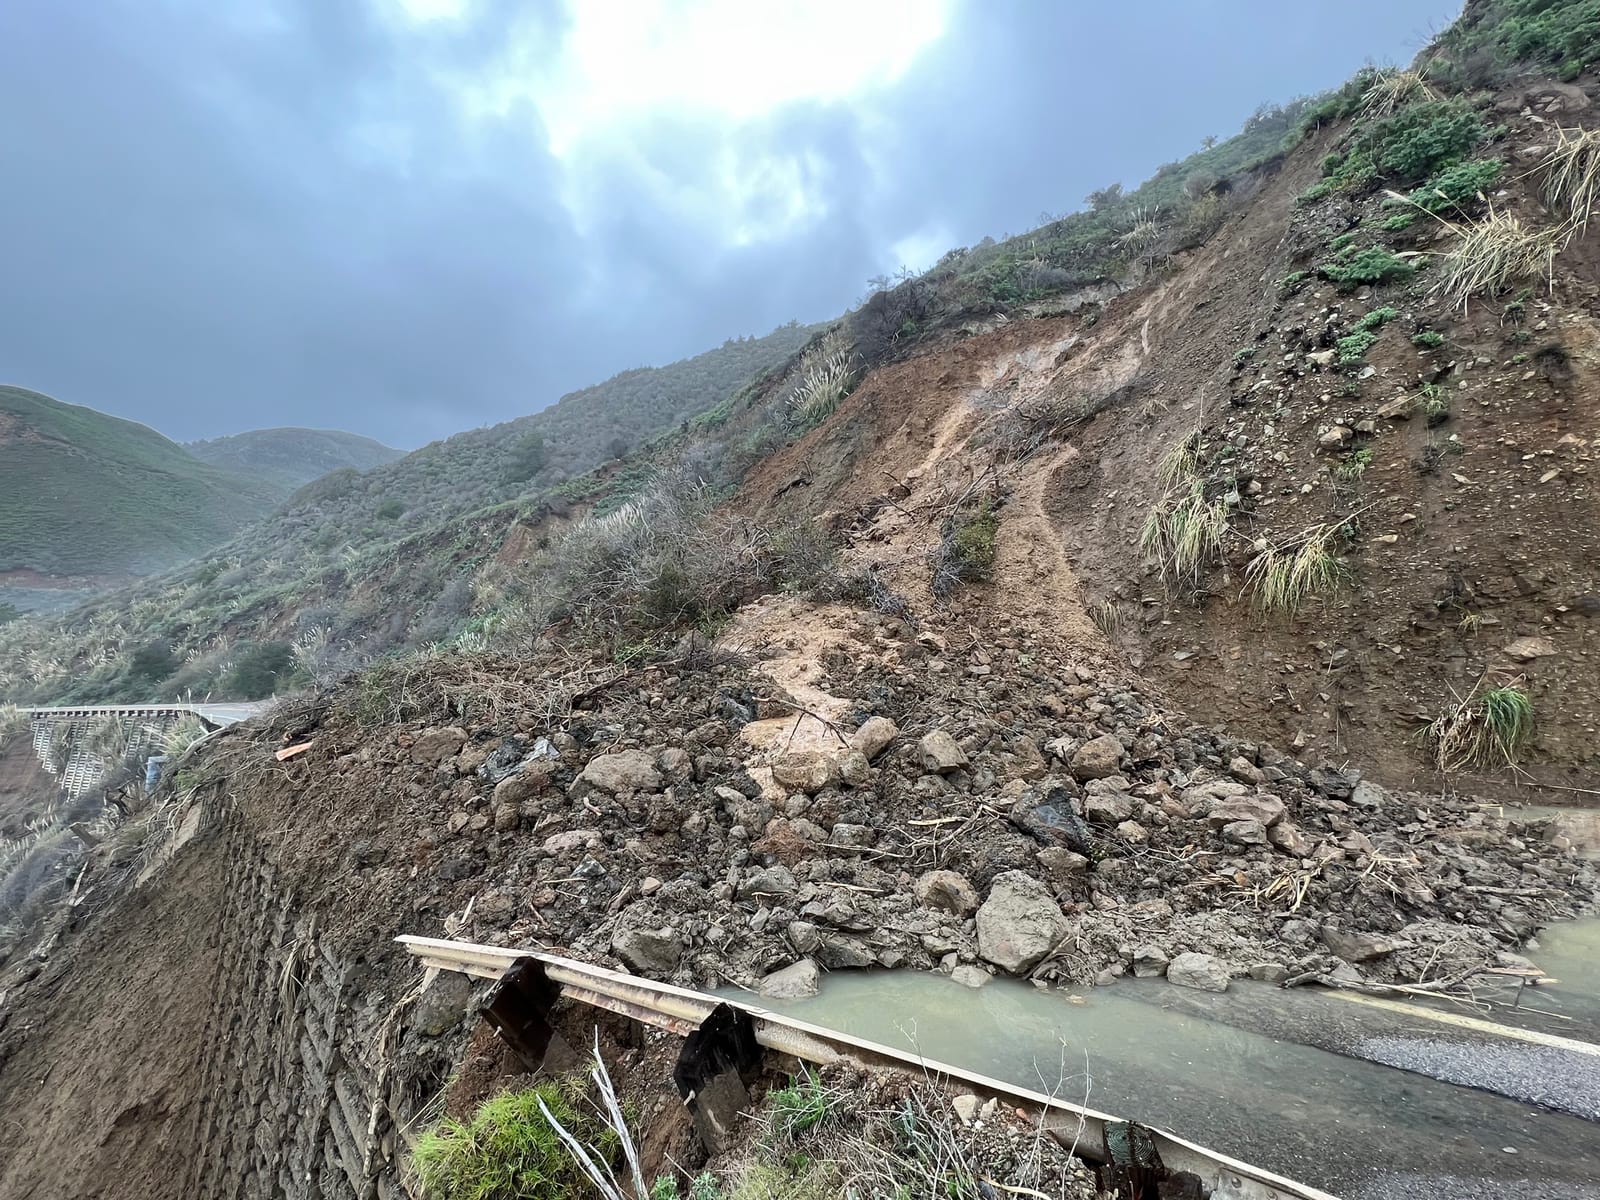 A landslide covering part of California’s Highway 1 in January 2023. (Credit: California Department of Transportation)